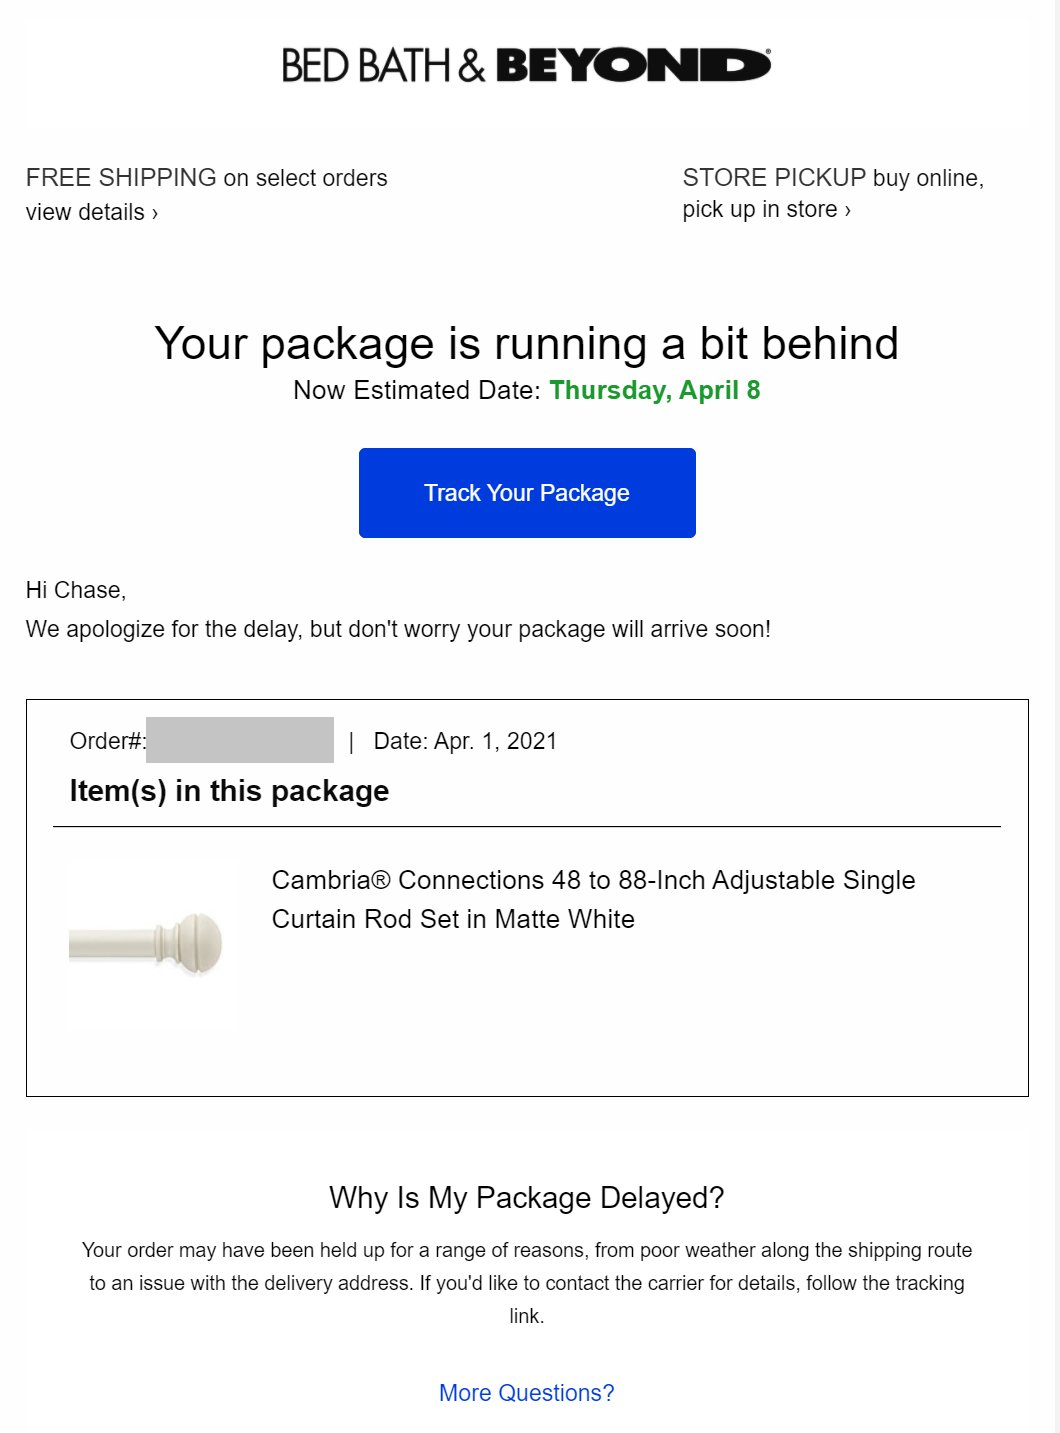 Bed Bath & Beyond Delayed Shipment Notification Durable Goods Email Template 